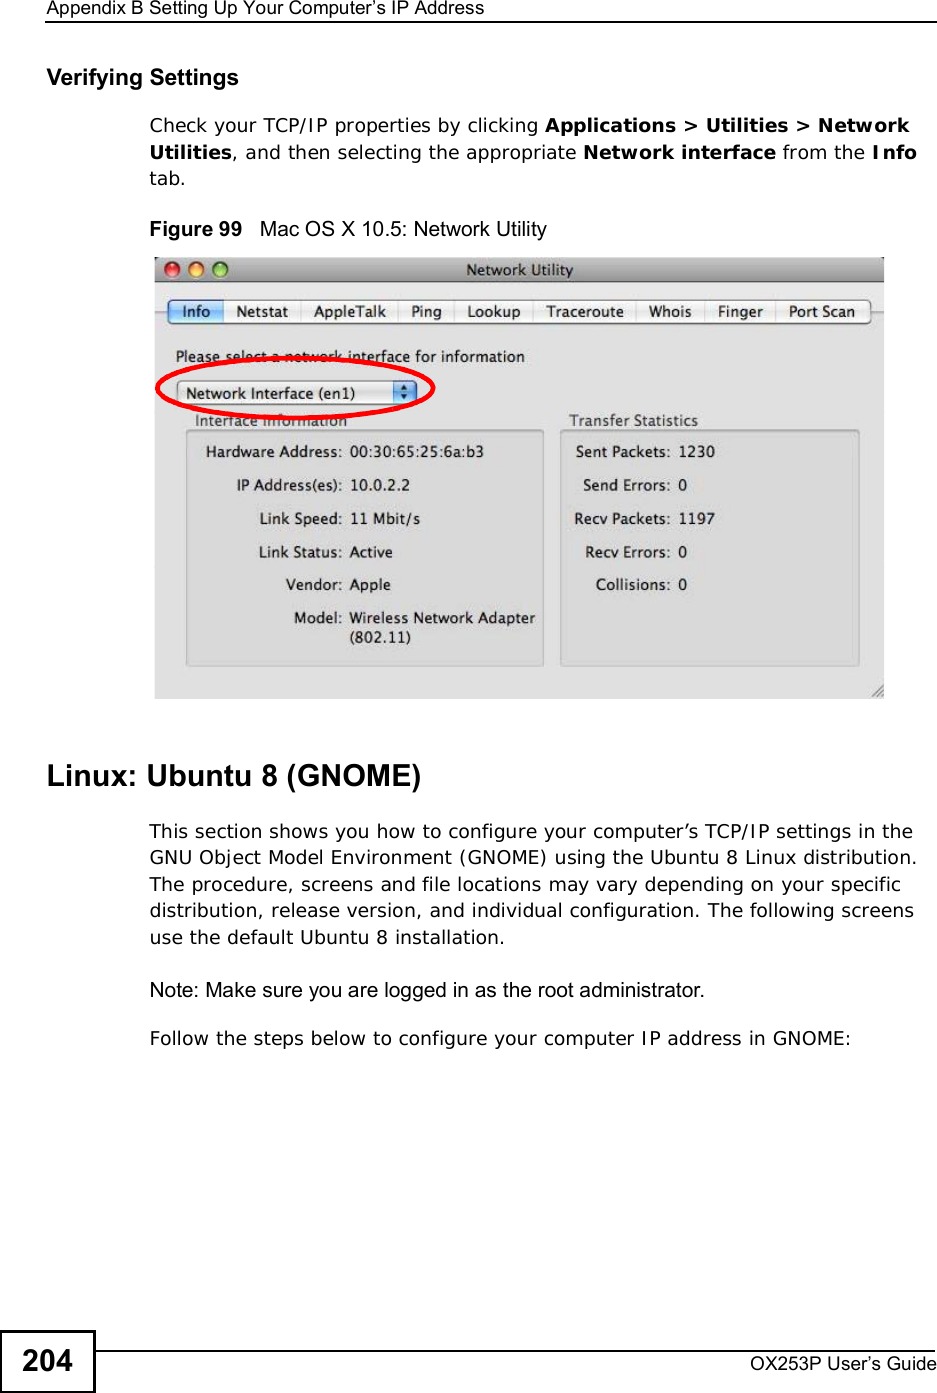 Appendix BSetting Up Your Computer’s IP AddressOX253P User’s Guide204Verifying SettingsCheck your TCP/IP properties by clicking Applications &gt; Utilities &gt; Network Utilities, and then selecting the appropriate Network interface from the Infotab.Figure 99   Mac OS X 10.5: Network UtilityLinux: Ubuntu 8 (GNOME)This section shows you how to configure your computer’s TCP/IP settings in the GNU Object Model Environment (GNOME) using the Ubuntu 8 Linux distribution. The procedure, screens and file locations may vary depending on your specific distribution, release version, and individual configuration. The following screens use the default Ubuntu 8 installation.Note: Make sure you are logged in as the root administrator. Follow the steps below to configure your computer IP address in GNOME: 